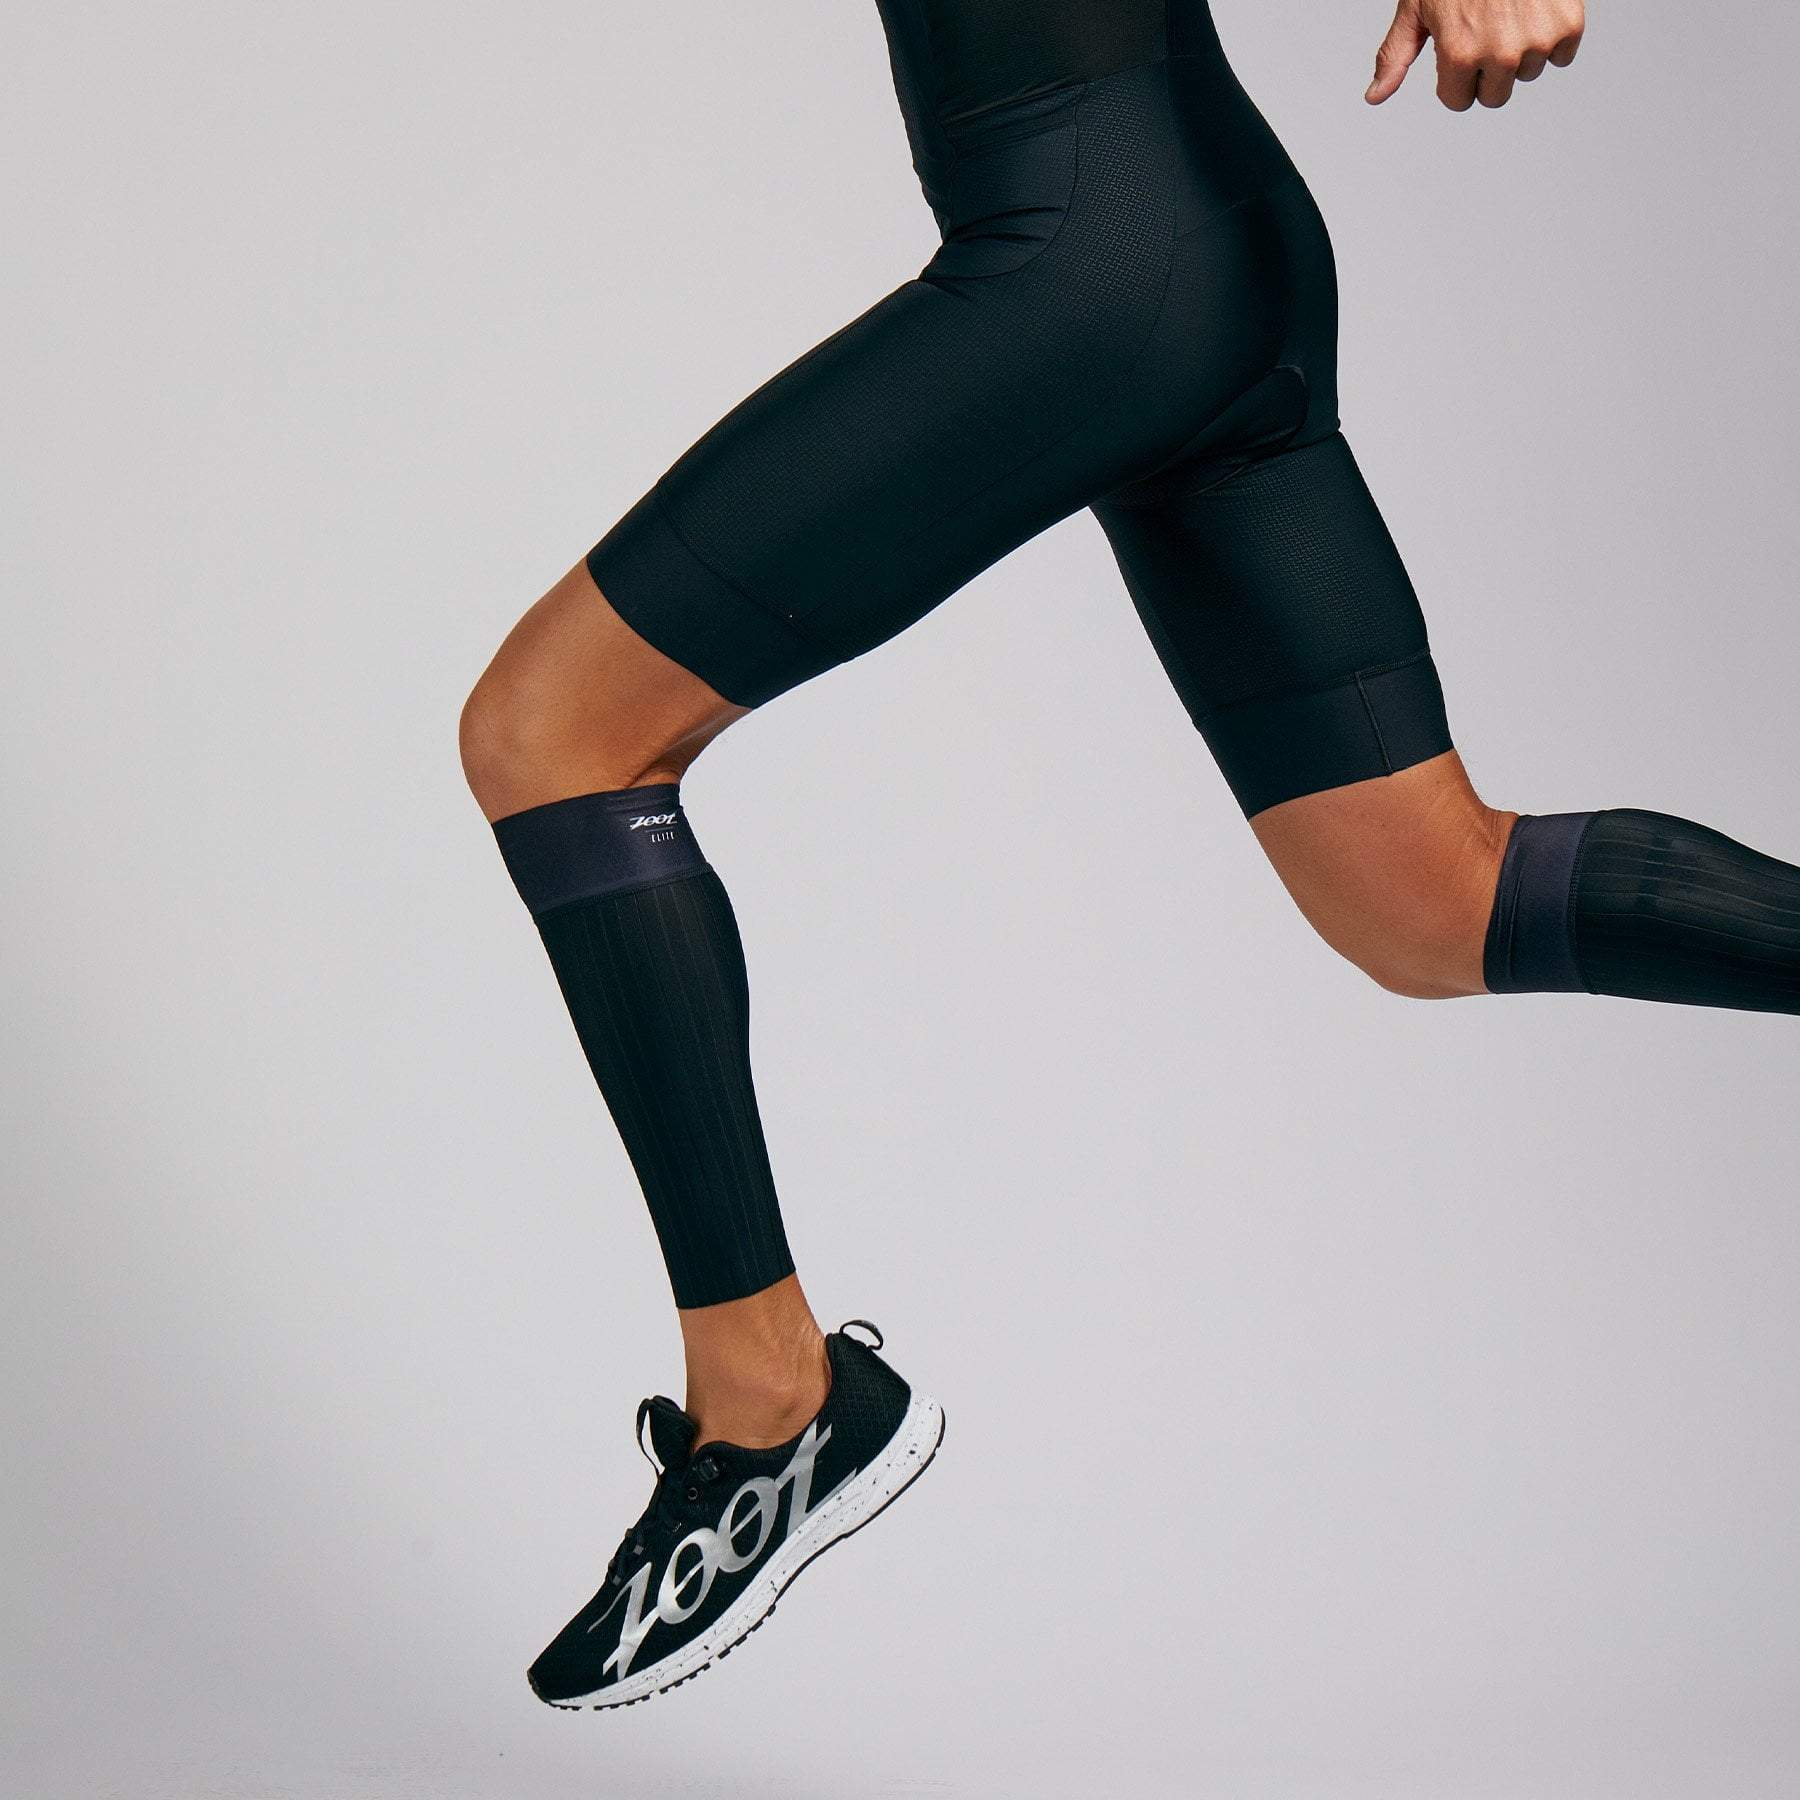 Are Calf Sleeves aero or are they fiction? 